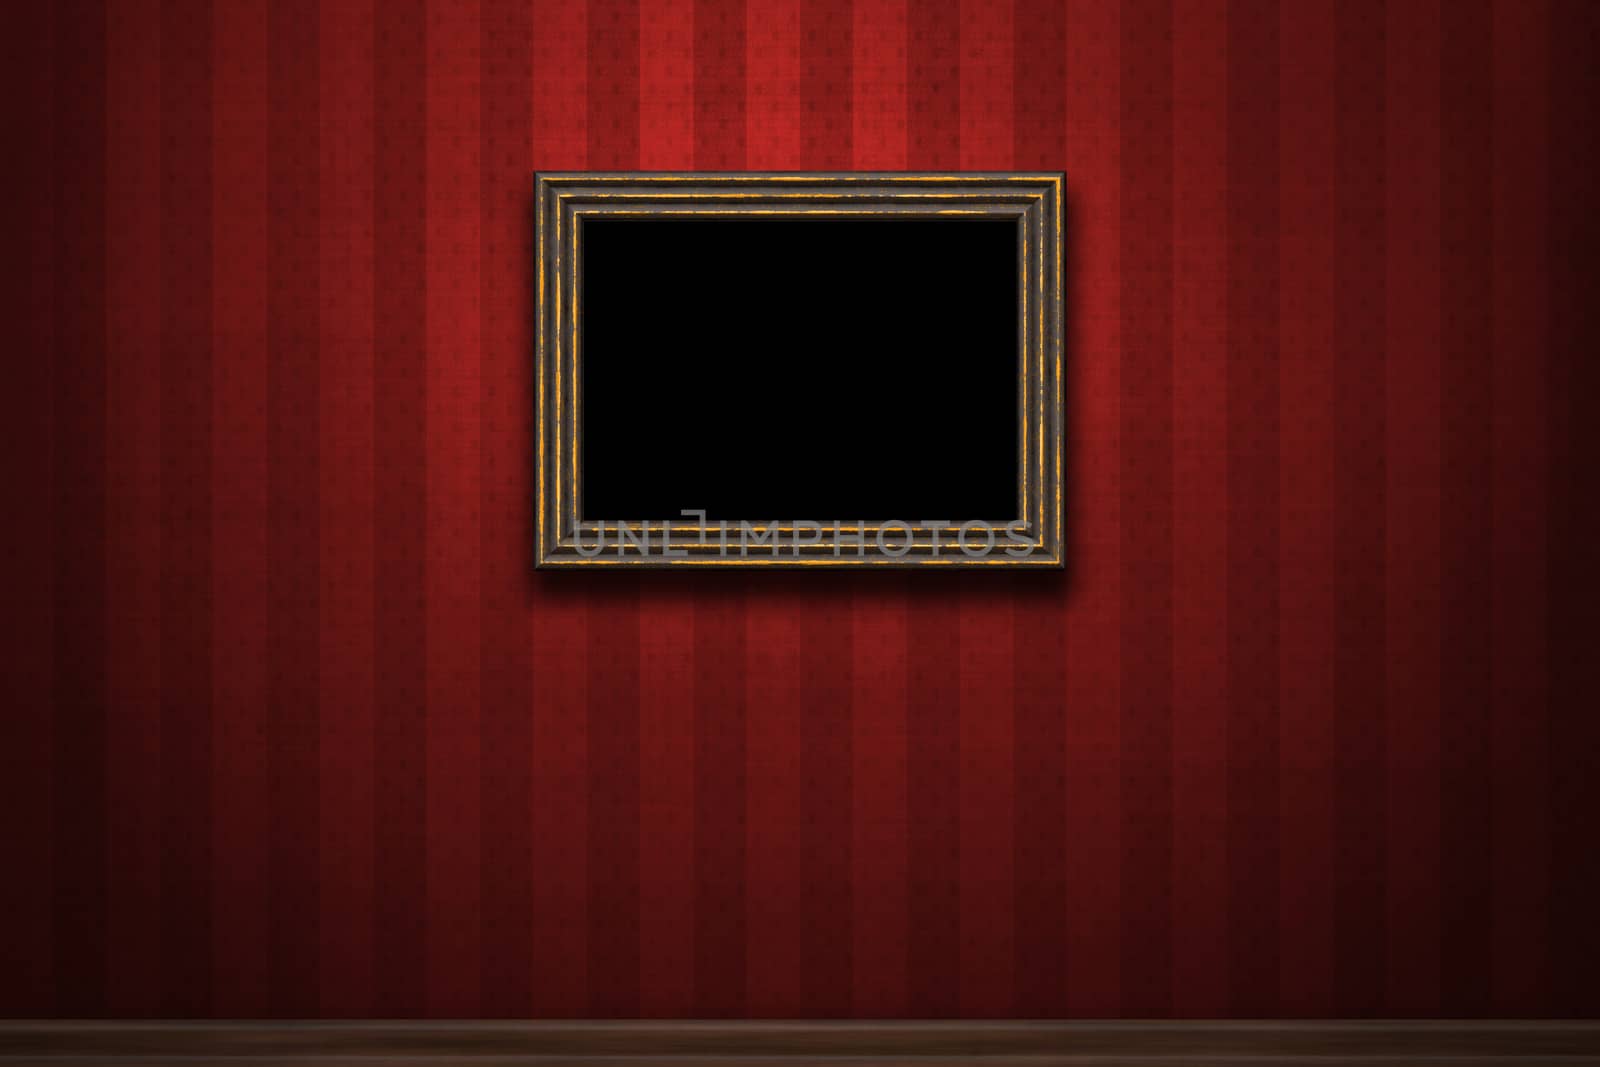 Old wooden frame on red retro grunge wall by Attila